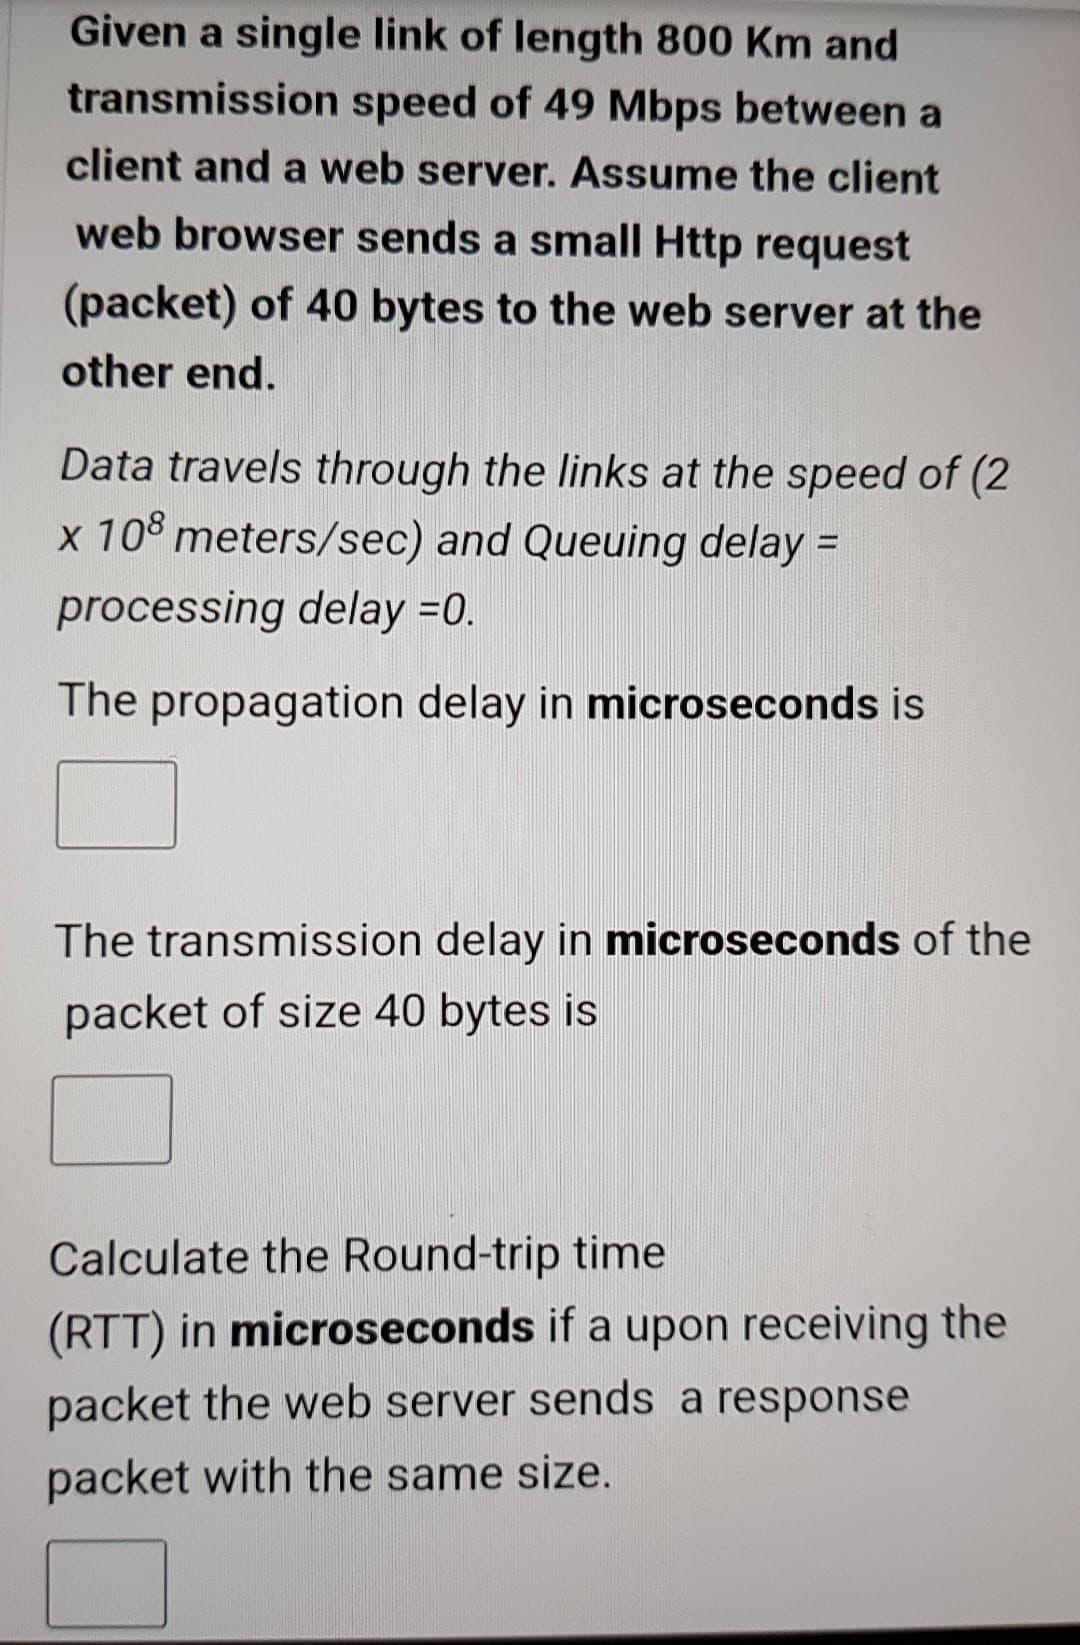 Given a single link of length 800 Km and
transmission speed of 49 Mbps between a
client and a web server. Assume the client
web browser sends a small Http request
(packet) of 40 bytes to the web server at the
other end.
Data travels through the links at the speed of (2
x 108 meters/sec) and Queuing delay =
processing delay =0.
The propagation delay in microseconds is
The transmission delay in microseconds of the
packet of size 40 bytes is
Calculate the Round-trip time
(RTT) in microseconds if a upon receiving the
packet the web server sends a response
packet with the same size.